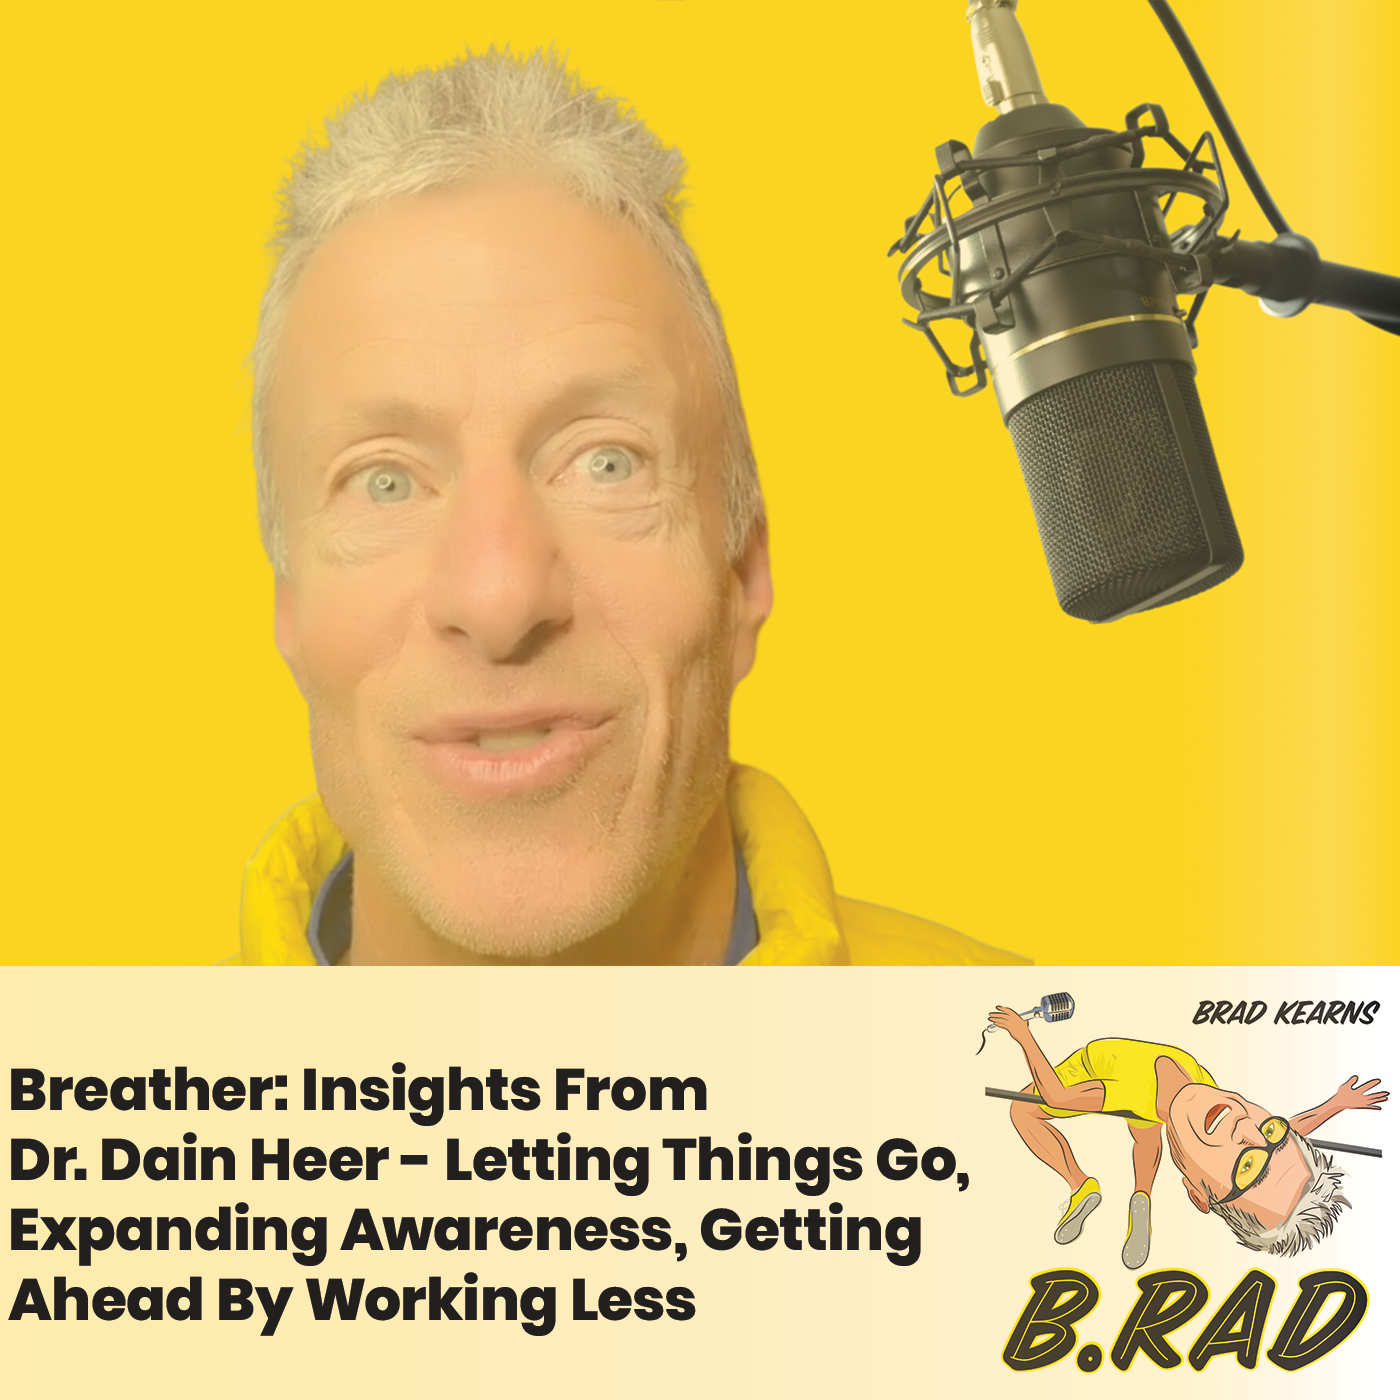 Breather: Insights From Dr Dain Heer - Letting Things Go, Expanding Awareness, Getting Ahead By Working Less